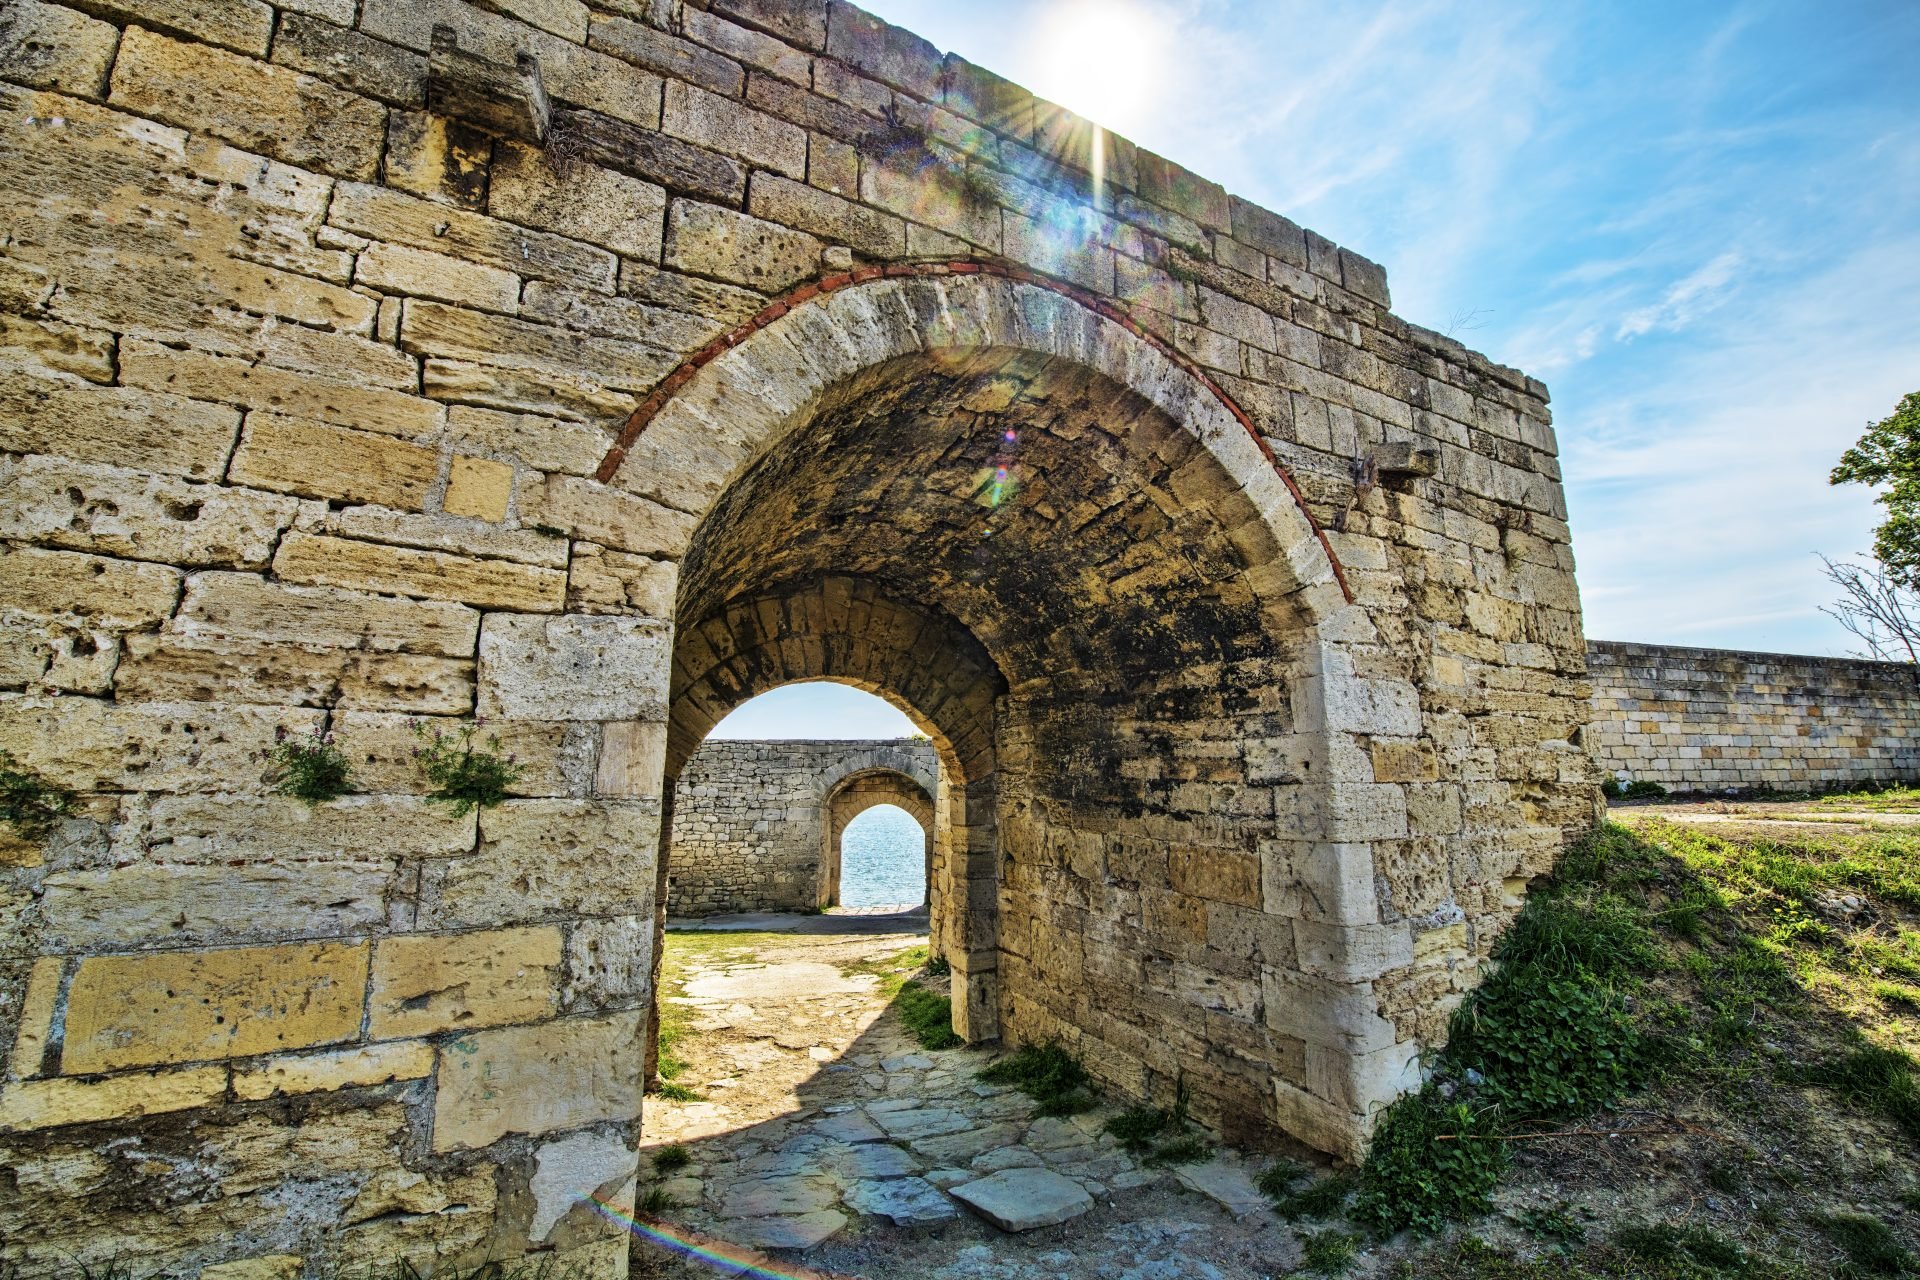 The sun illuminates an ancient stone wall through an archway, creating a beautiful and serene scene.